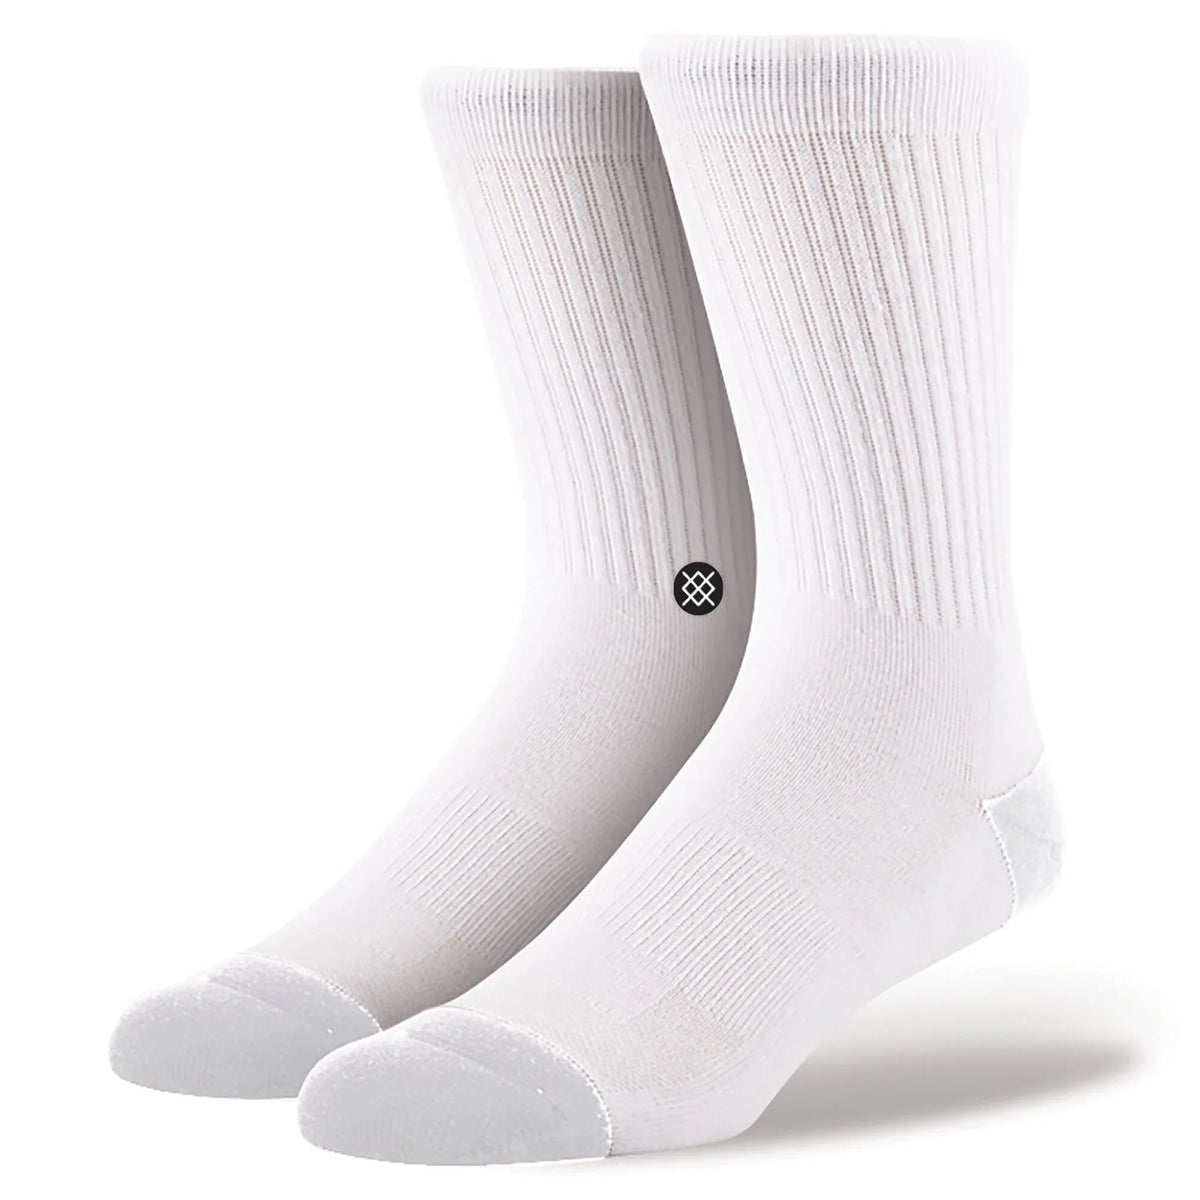 Stance ICON Crew Socks - LARGE - WHITE- 3 PACK